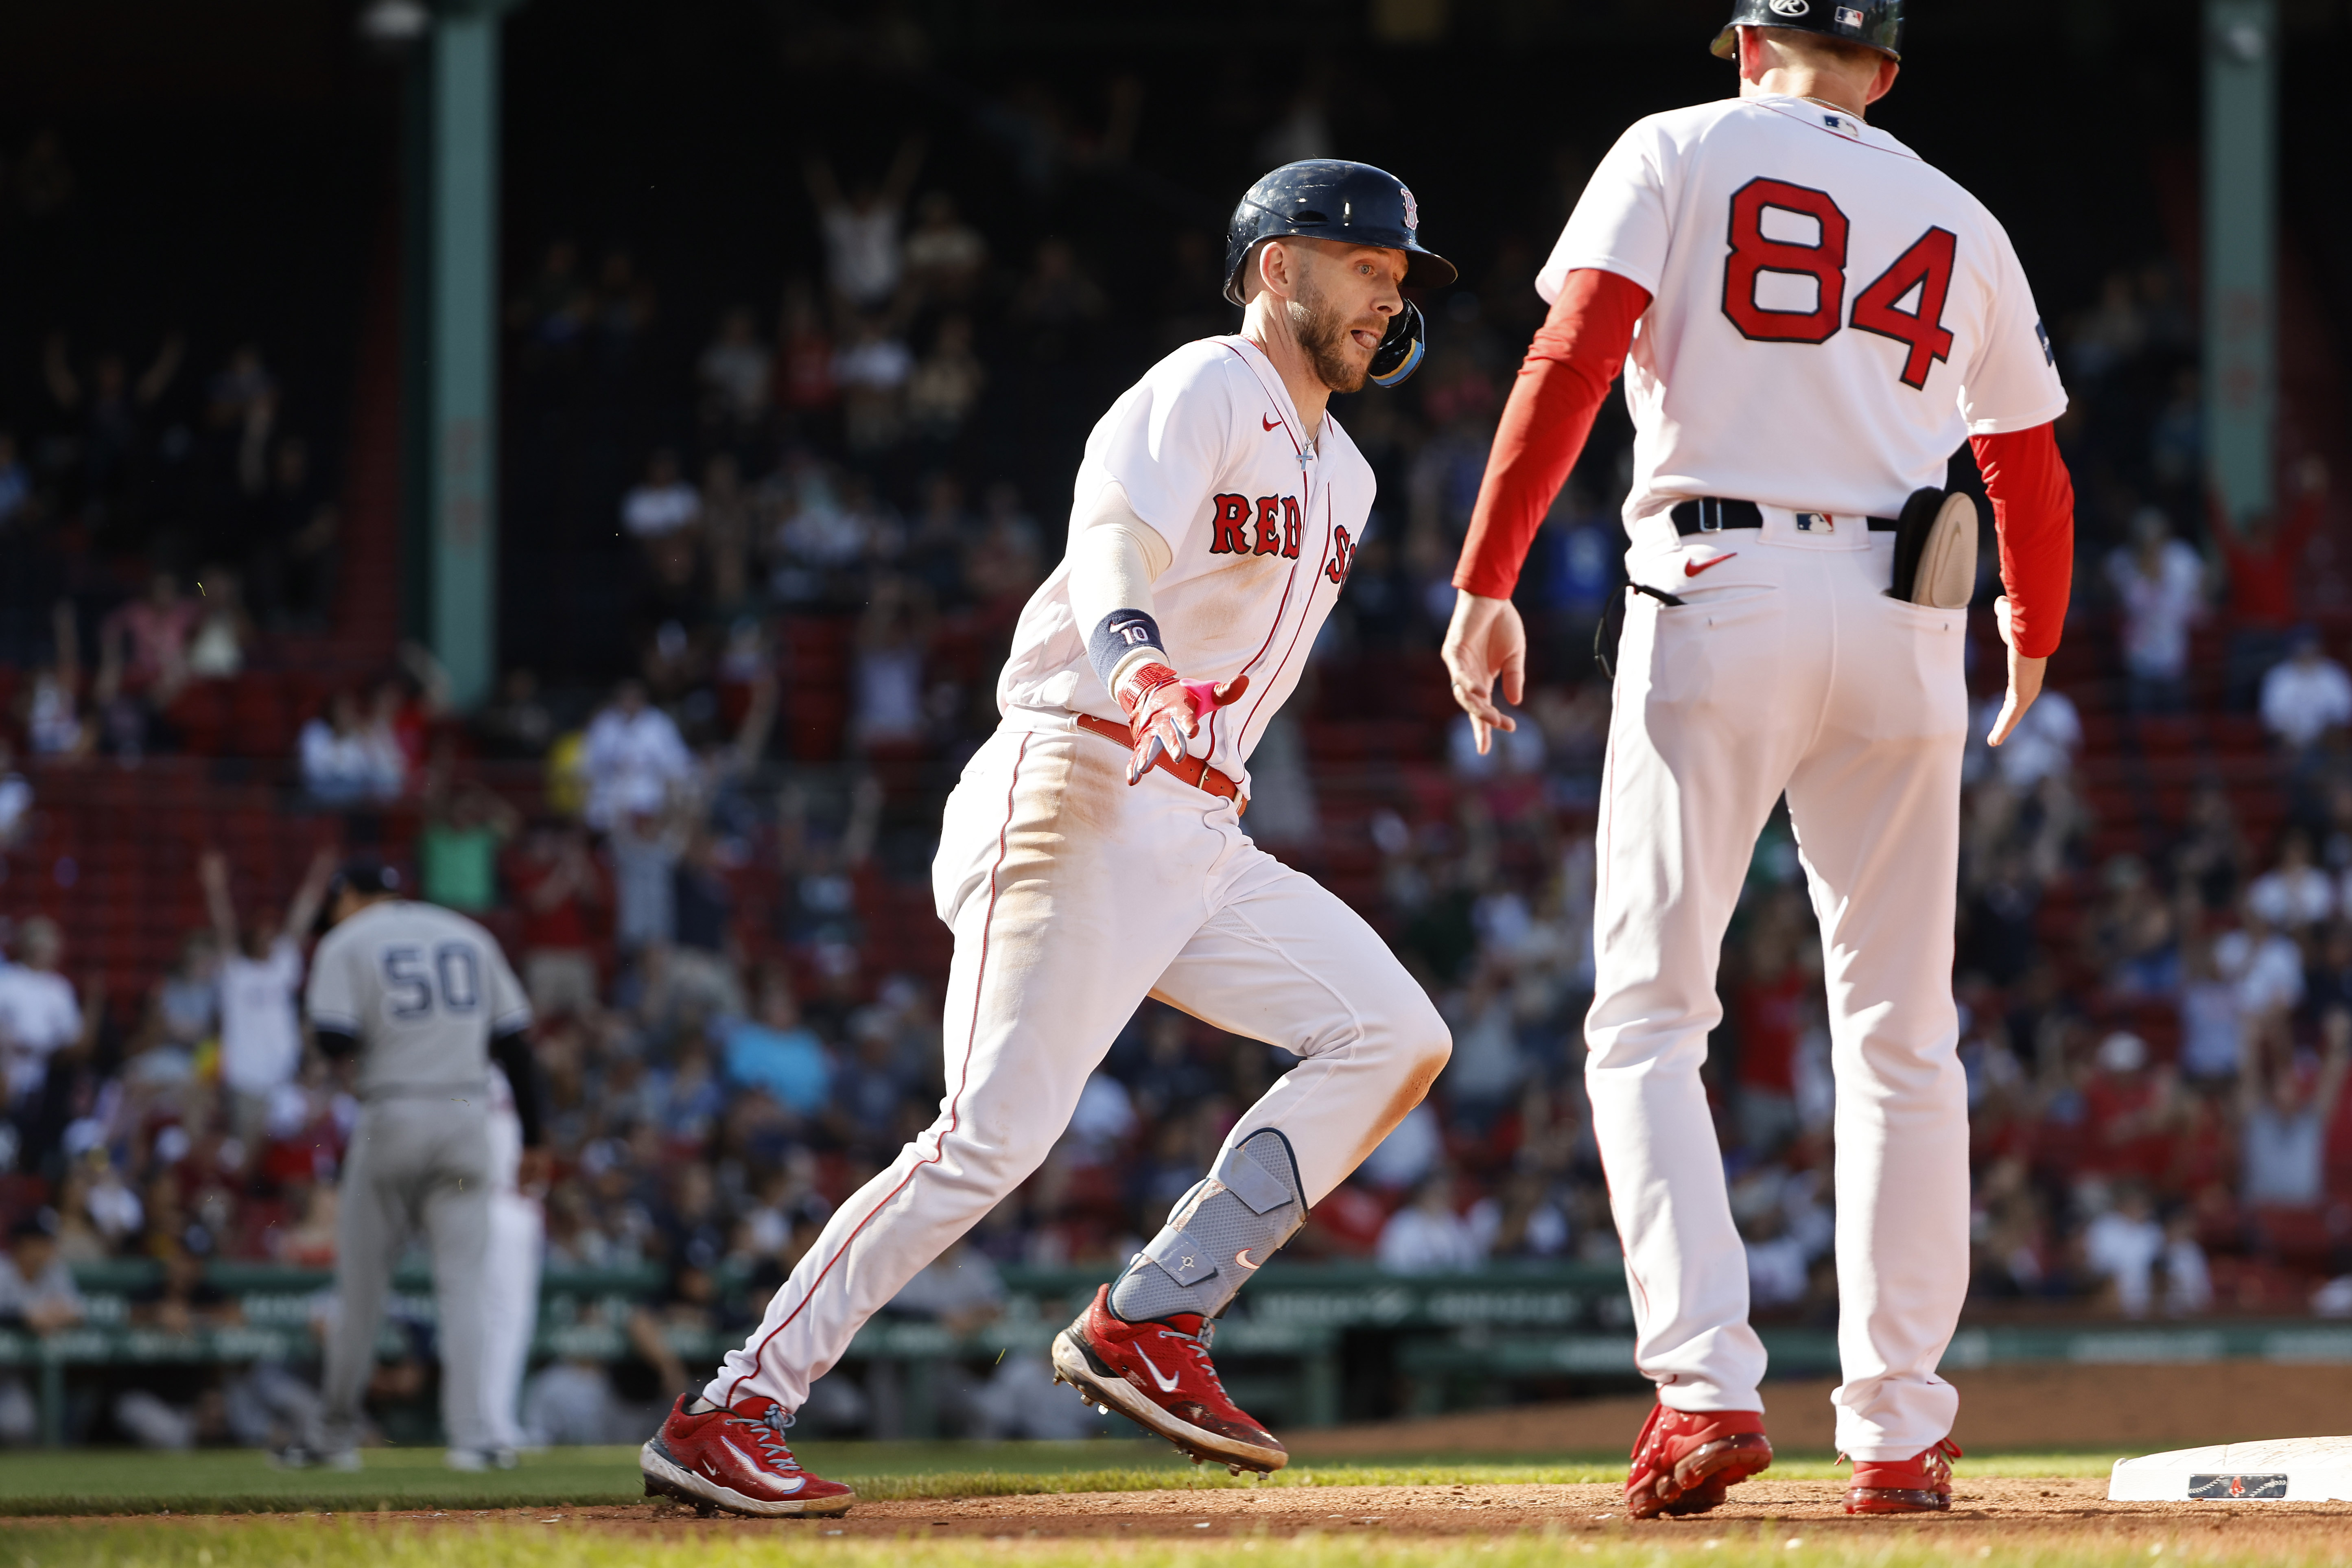 Red Sox's Trevor Story undergoes elbow surgery, will miss portion